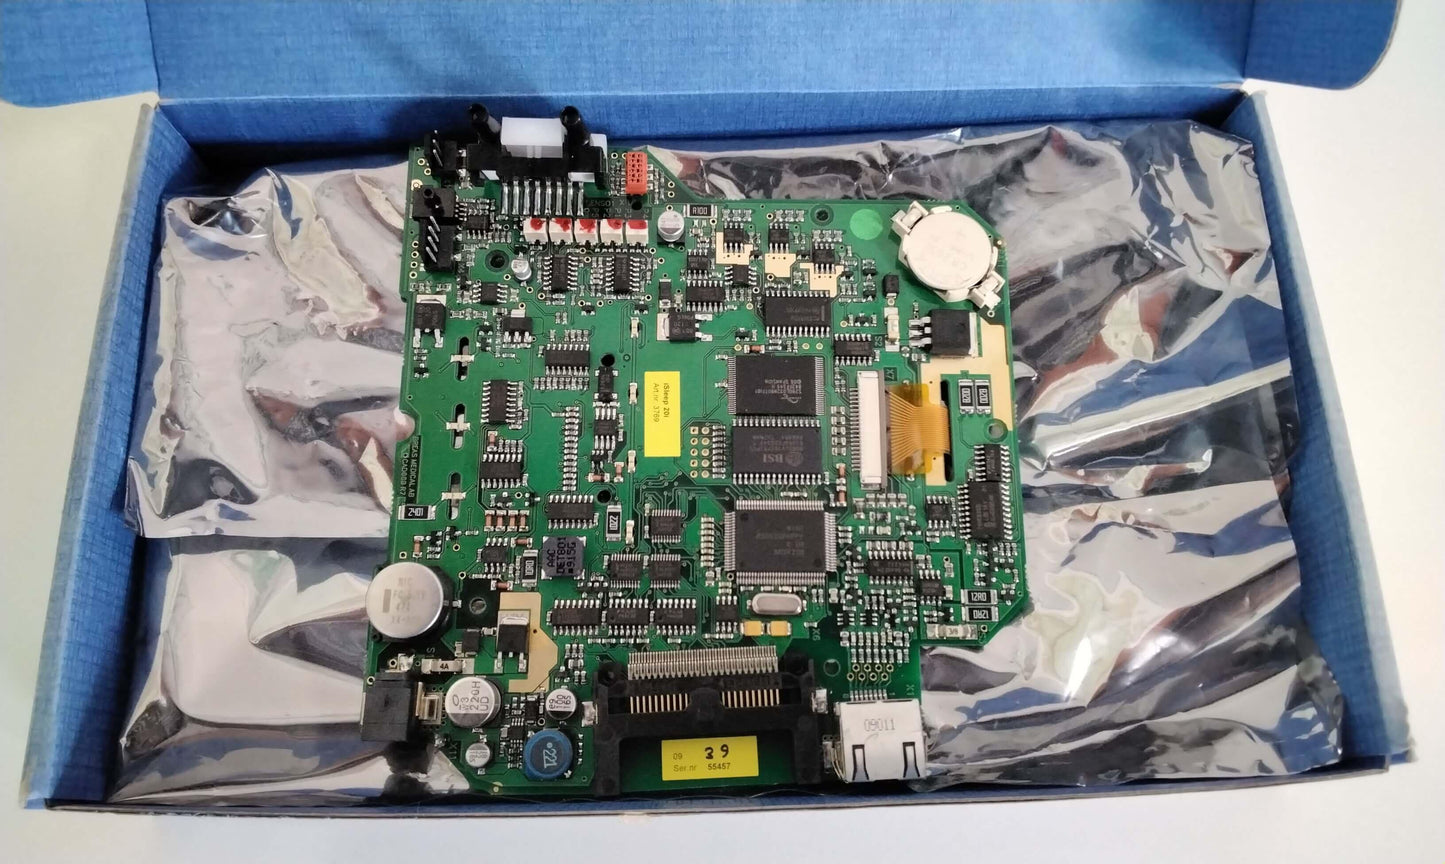 NEW Open Box Breas Medical iSleep 20i PCB Board 004331 with Free Shipping and Warranty - MBR Medicals